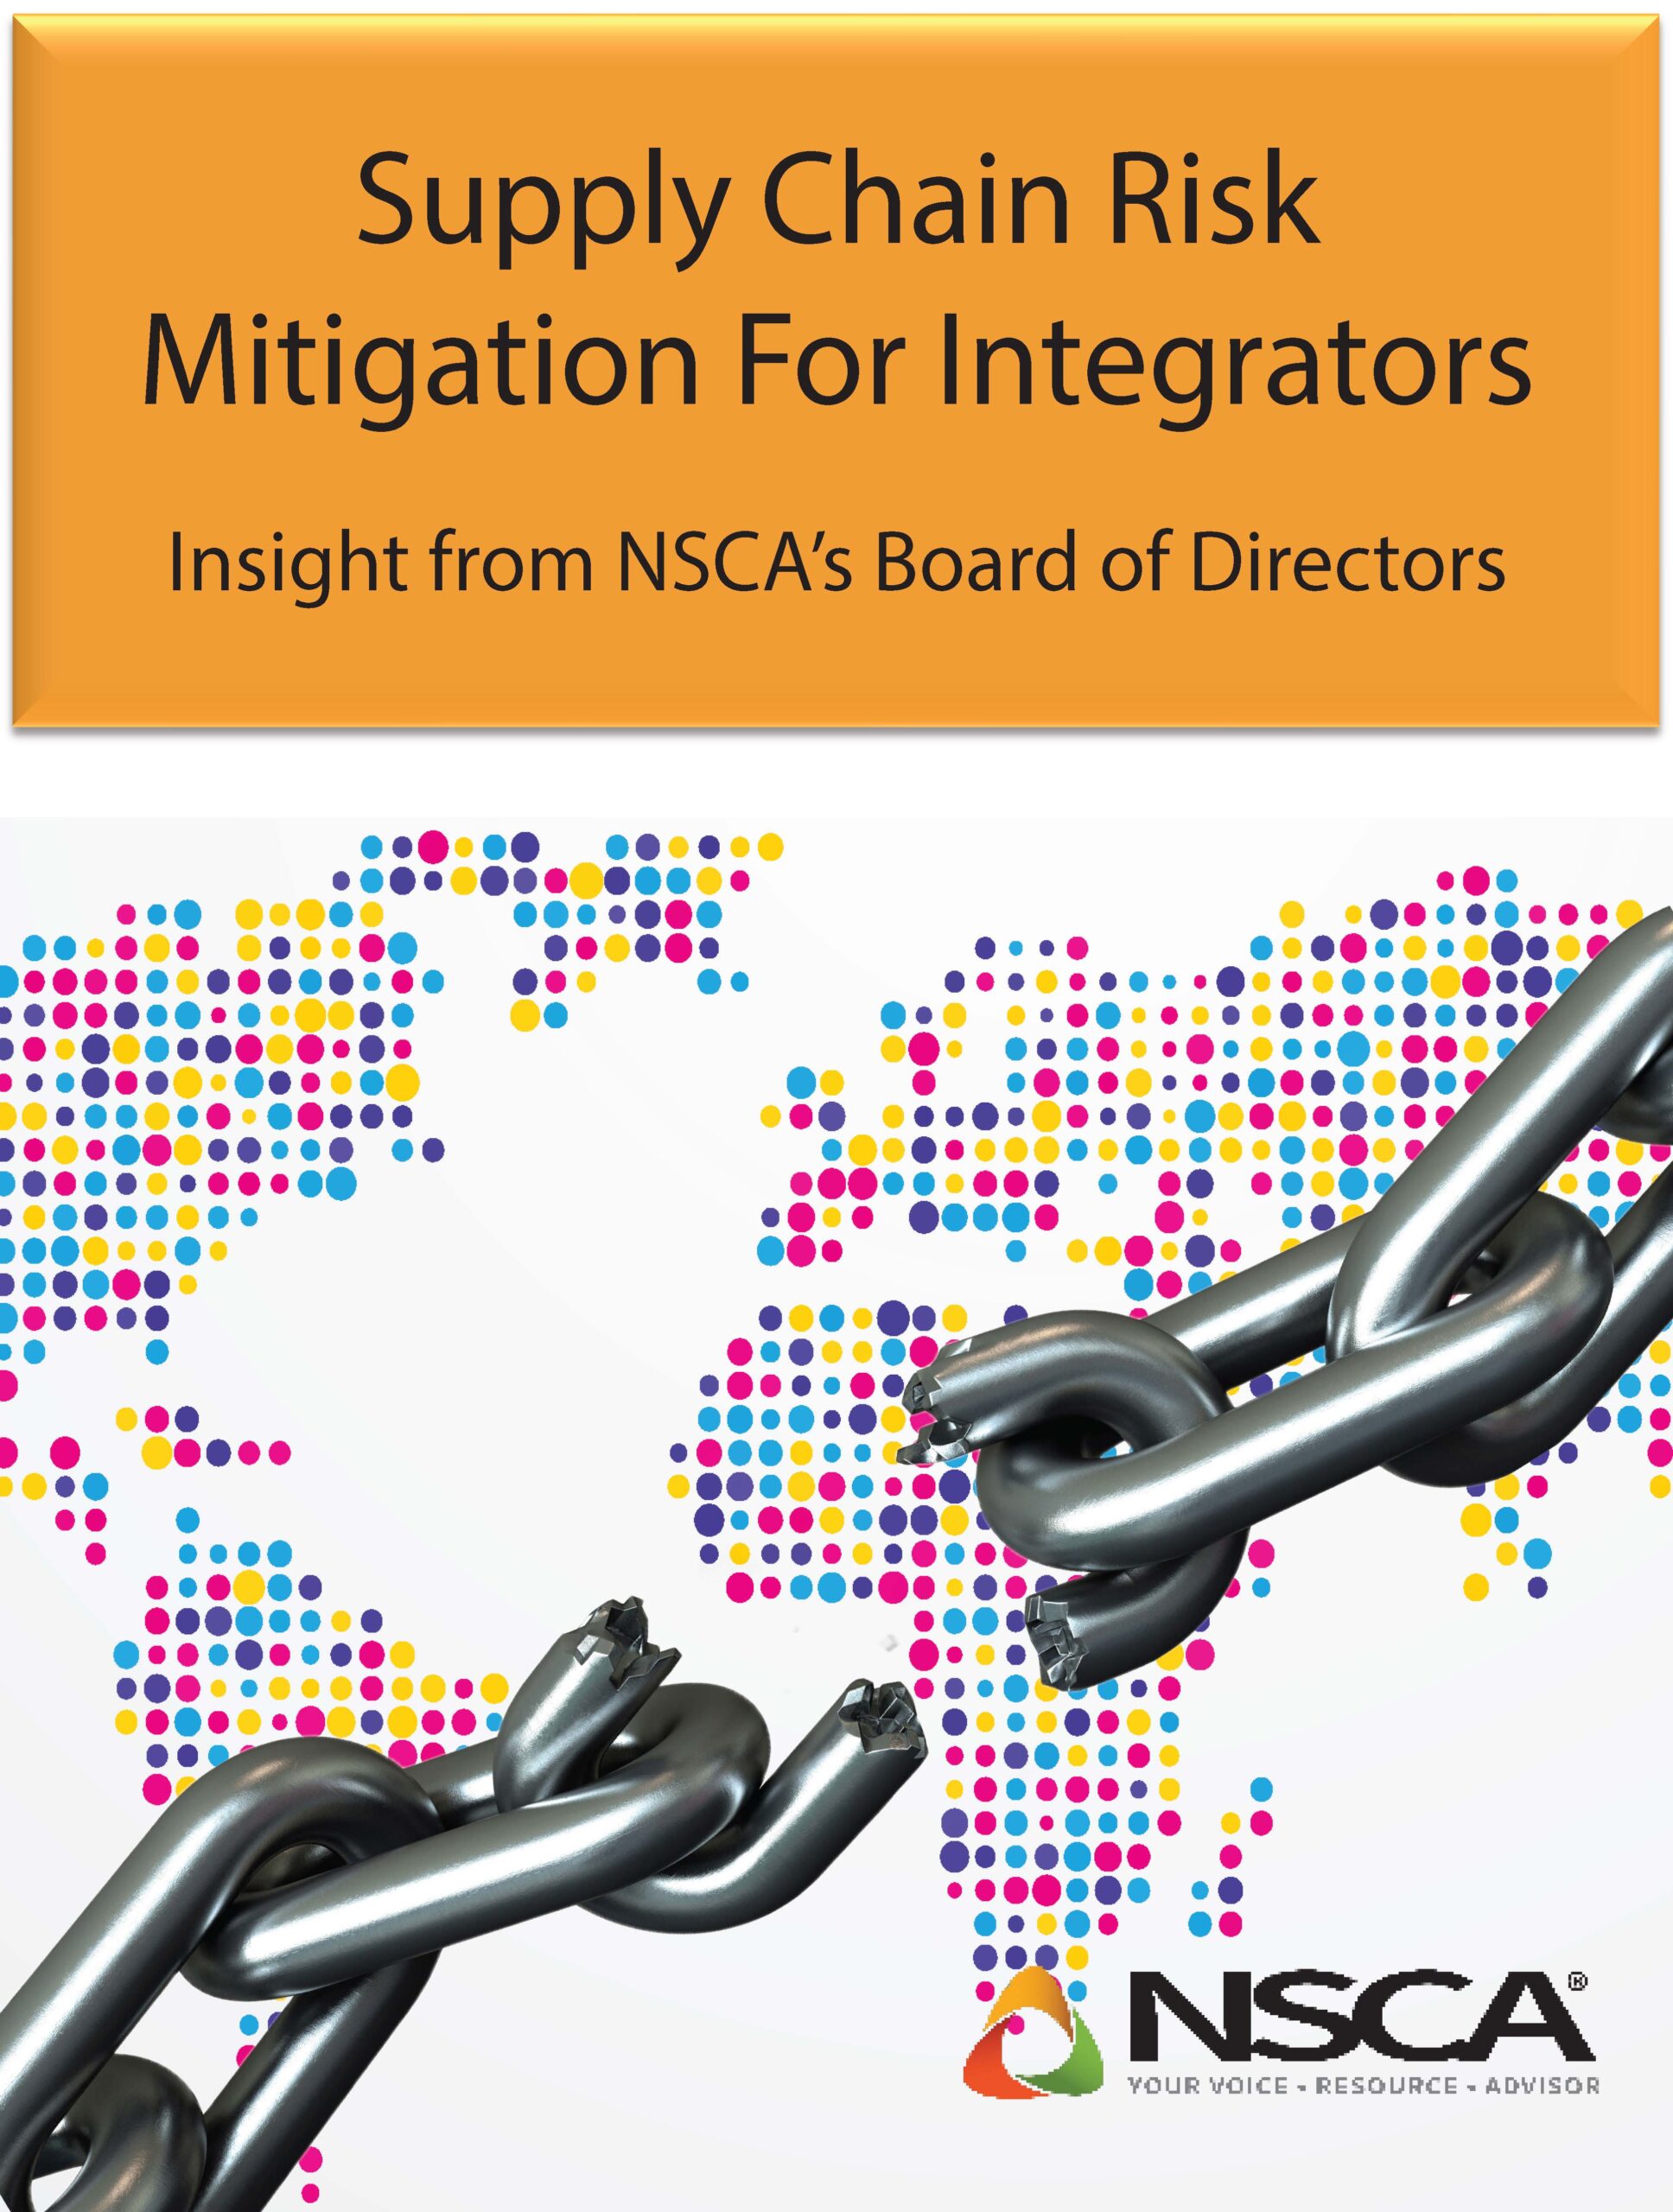 Supply-Chain-Risk-Mitigation-Cover-Image-scaled